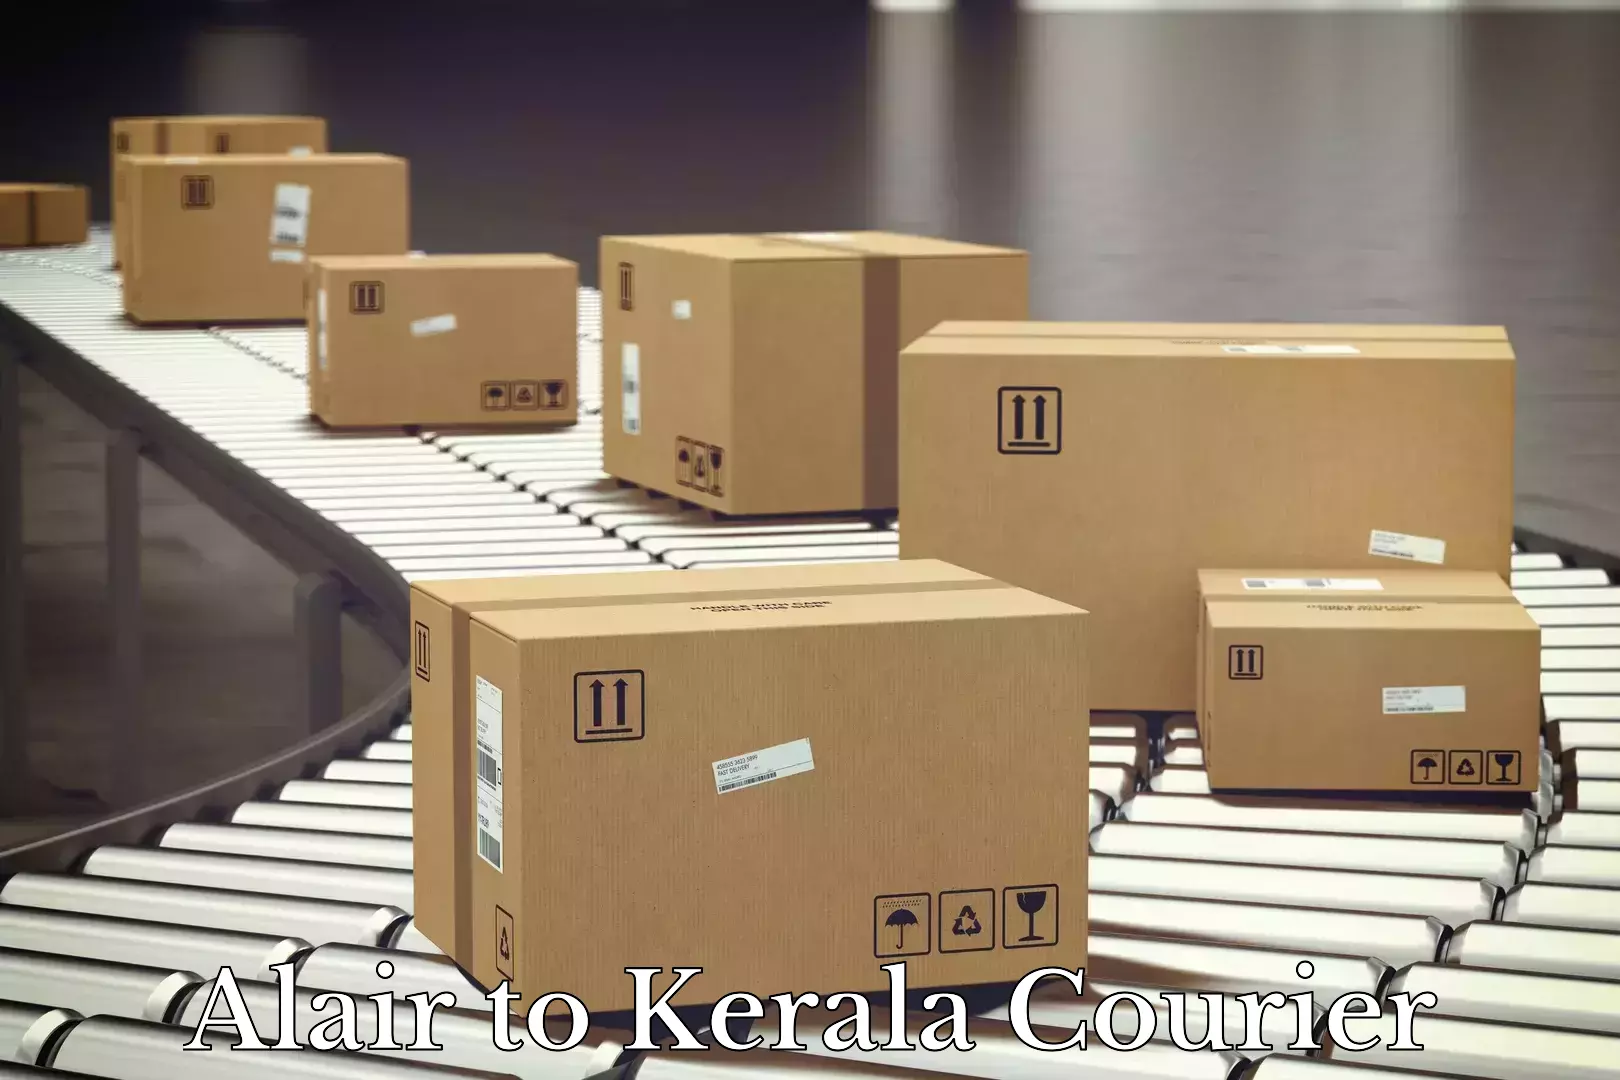 State-of-the-art courier technology Alair to Kerala